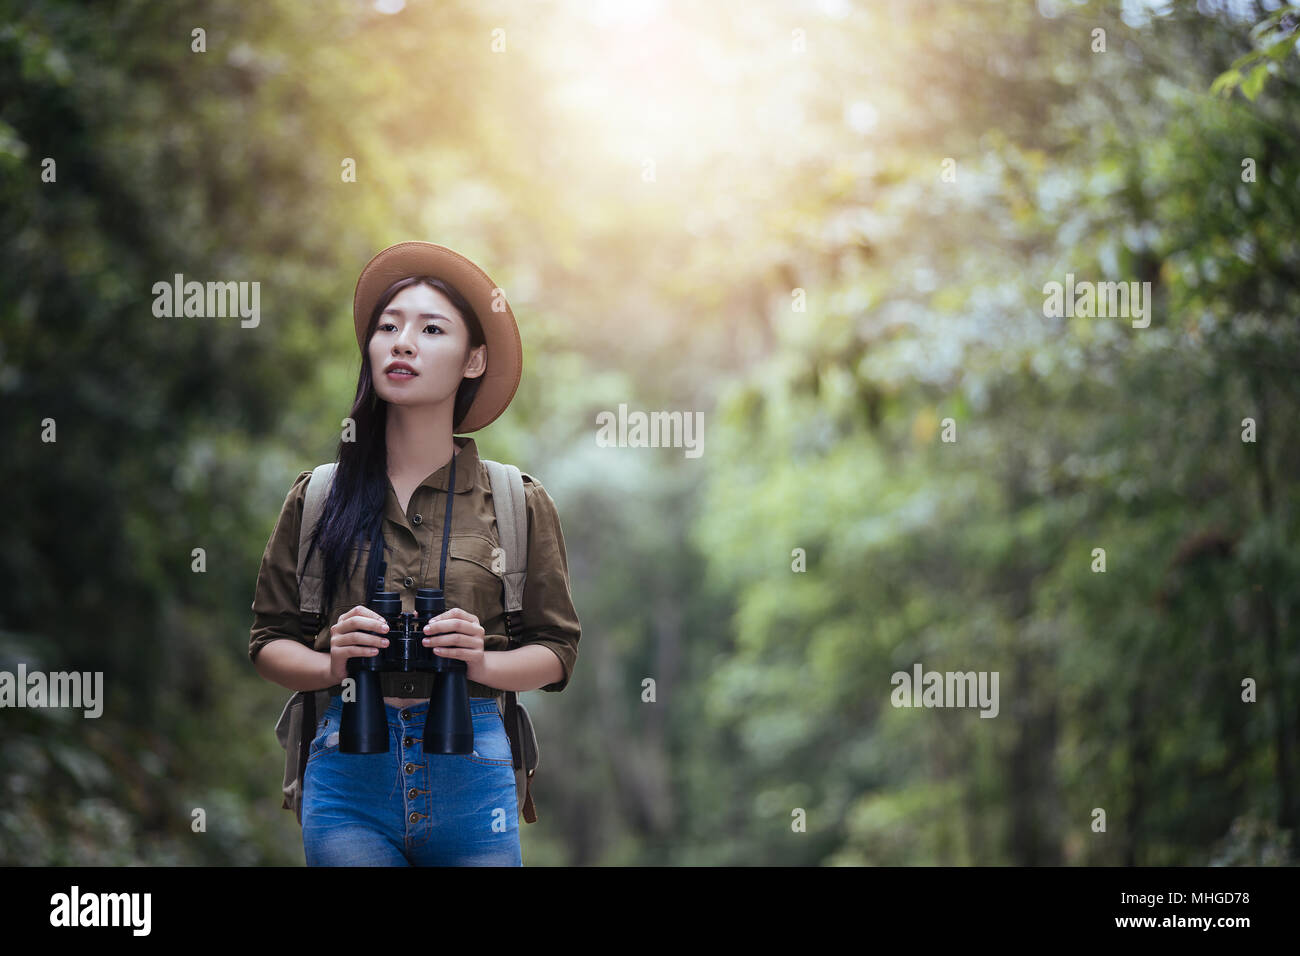 Hiking young woman with binoculars, Hiking concept. Hiking concept Stock Photo